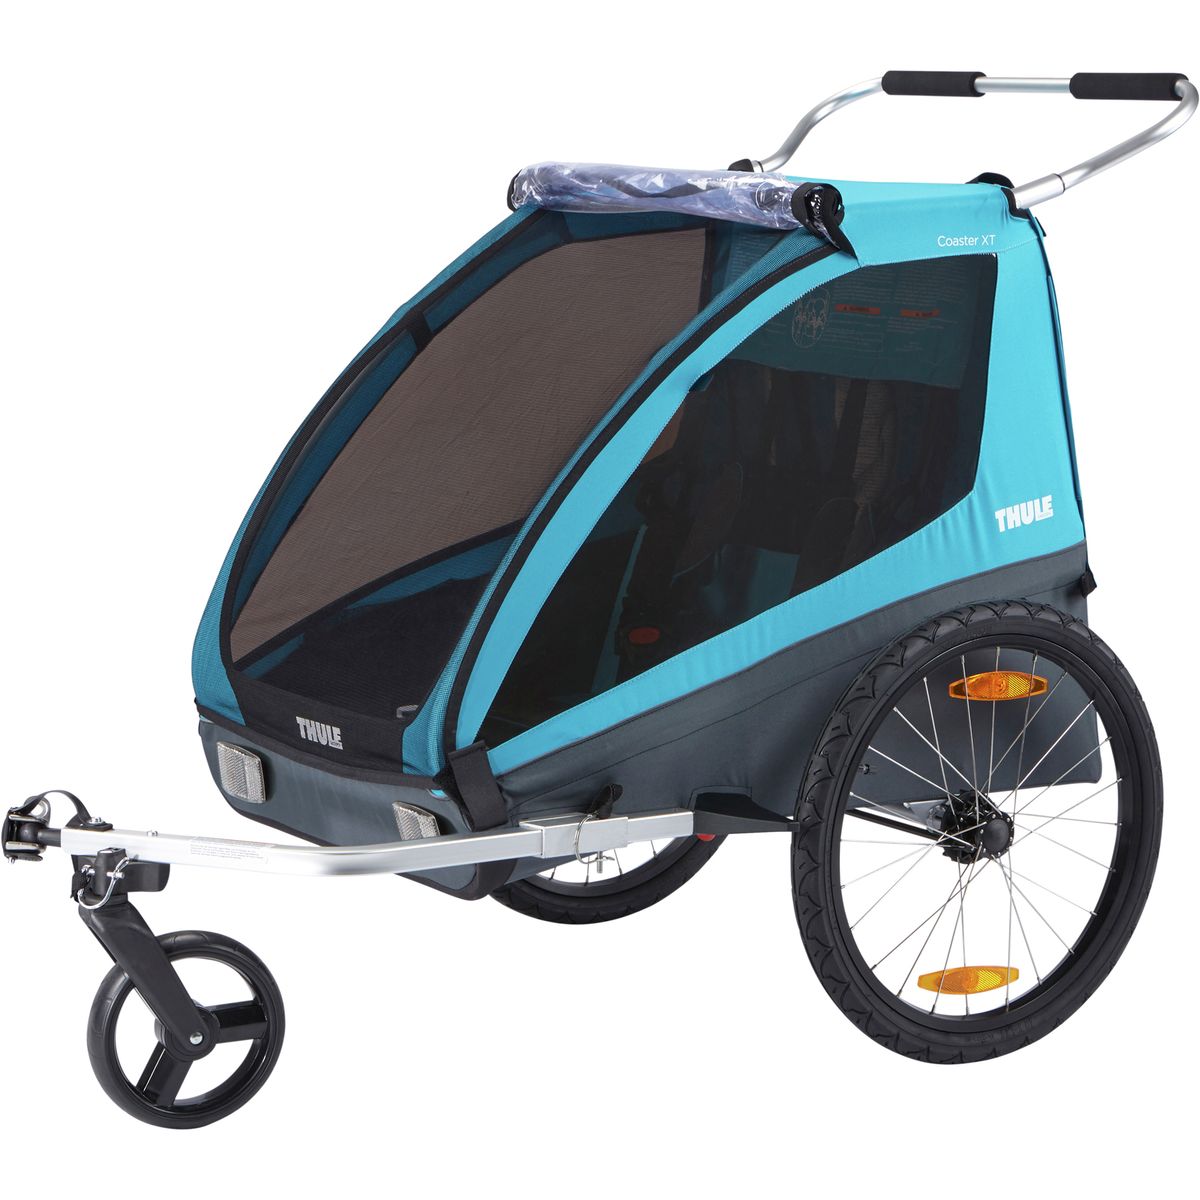 Thule Chariot Coaster XT with Bicycle Trailer Kit Stroller Kit